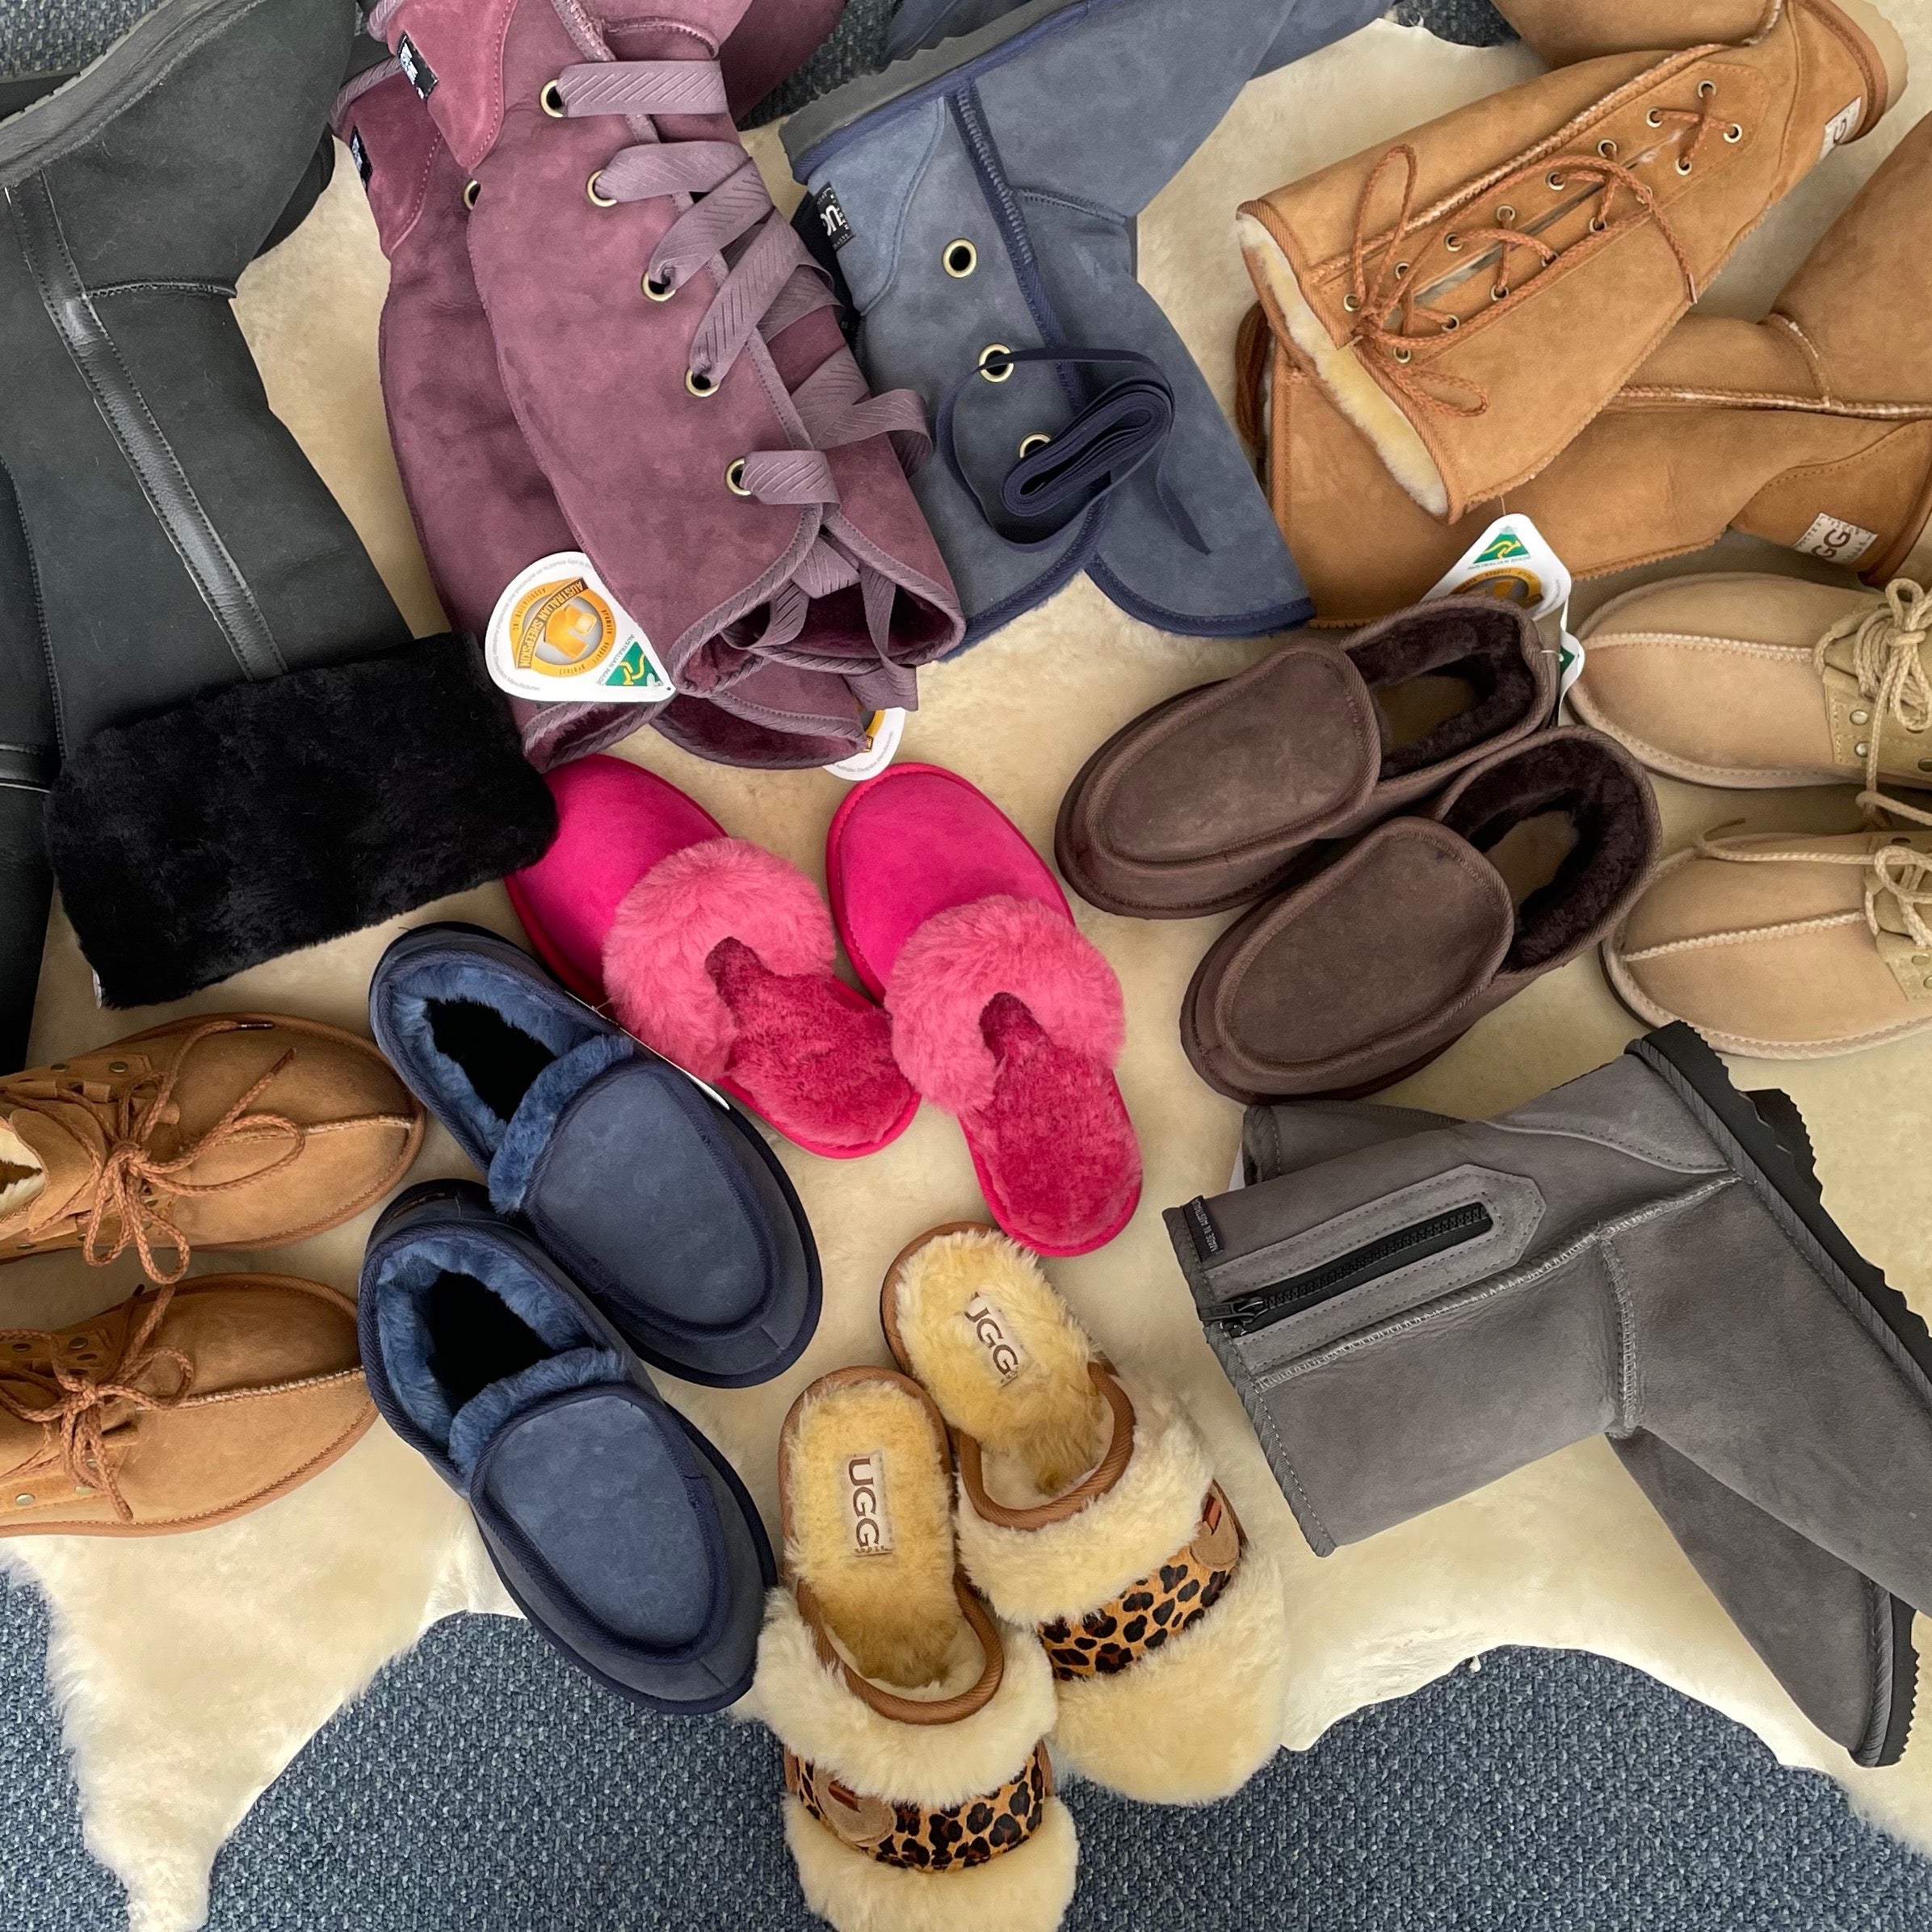 Australian Ugg Boots Clearance Range - slippers, Ugg Boots, at reduced prices.